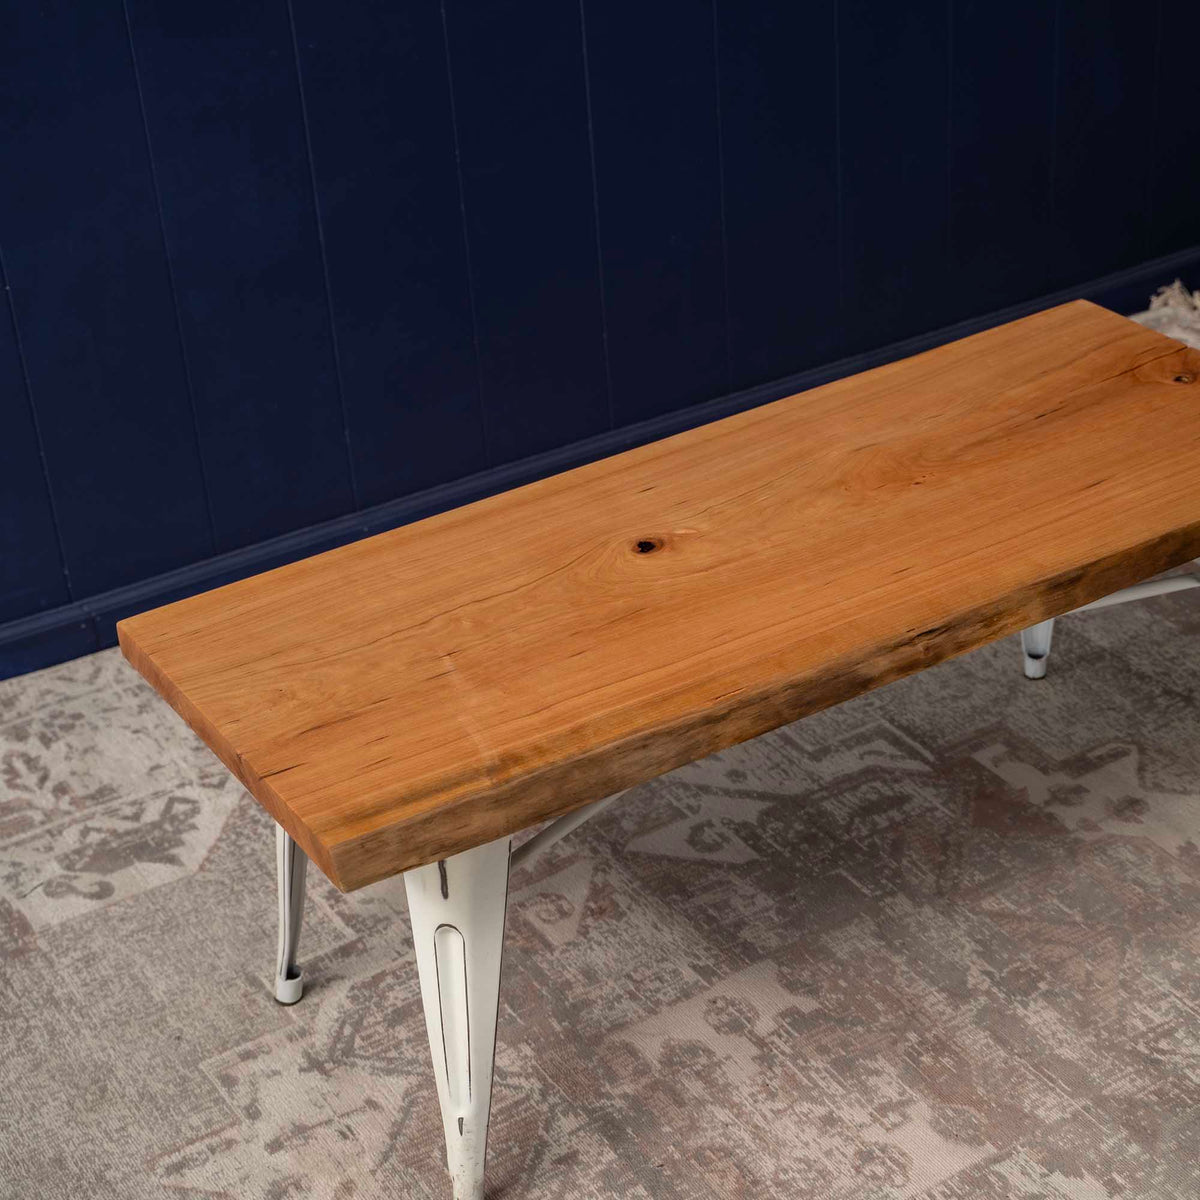 No 10. - 2” Finished Cherry Live Edge Slab Console Table Top Finished Sanded &amp; Oiled Console Coffee Table Desk Top Ready